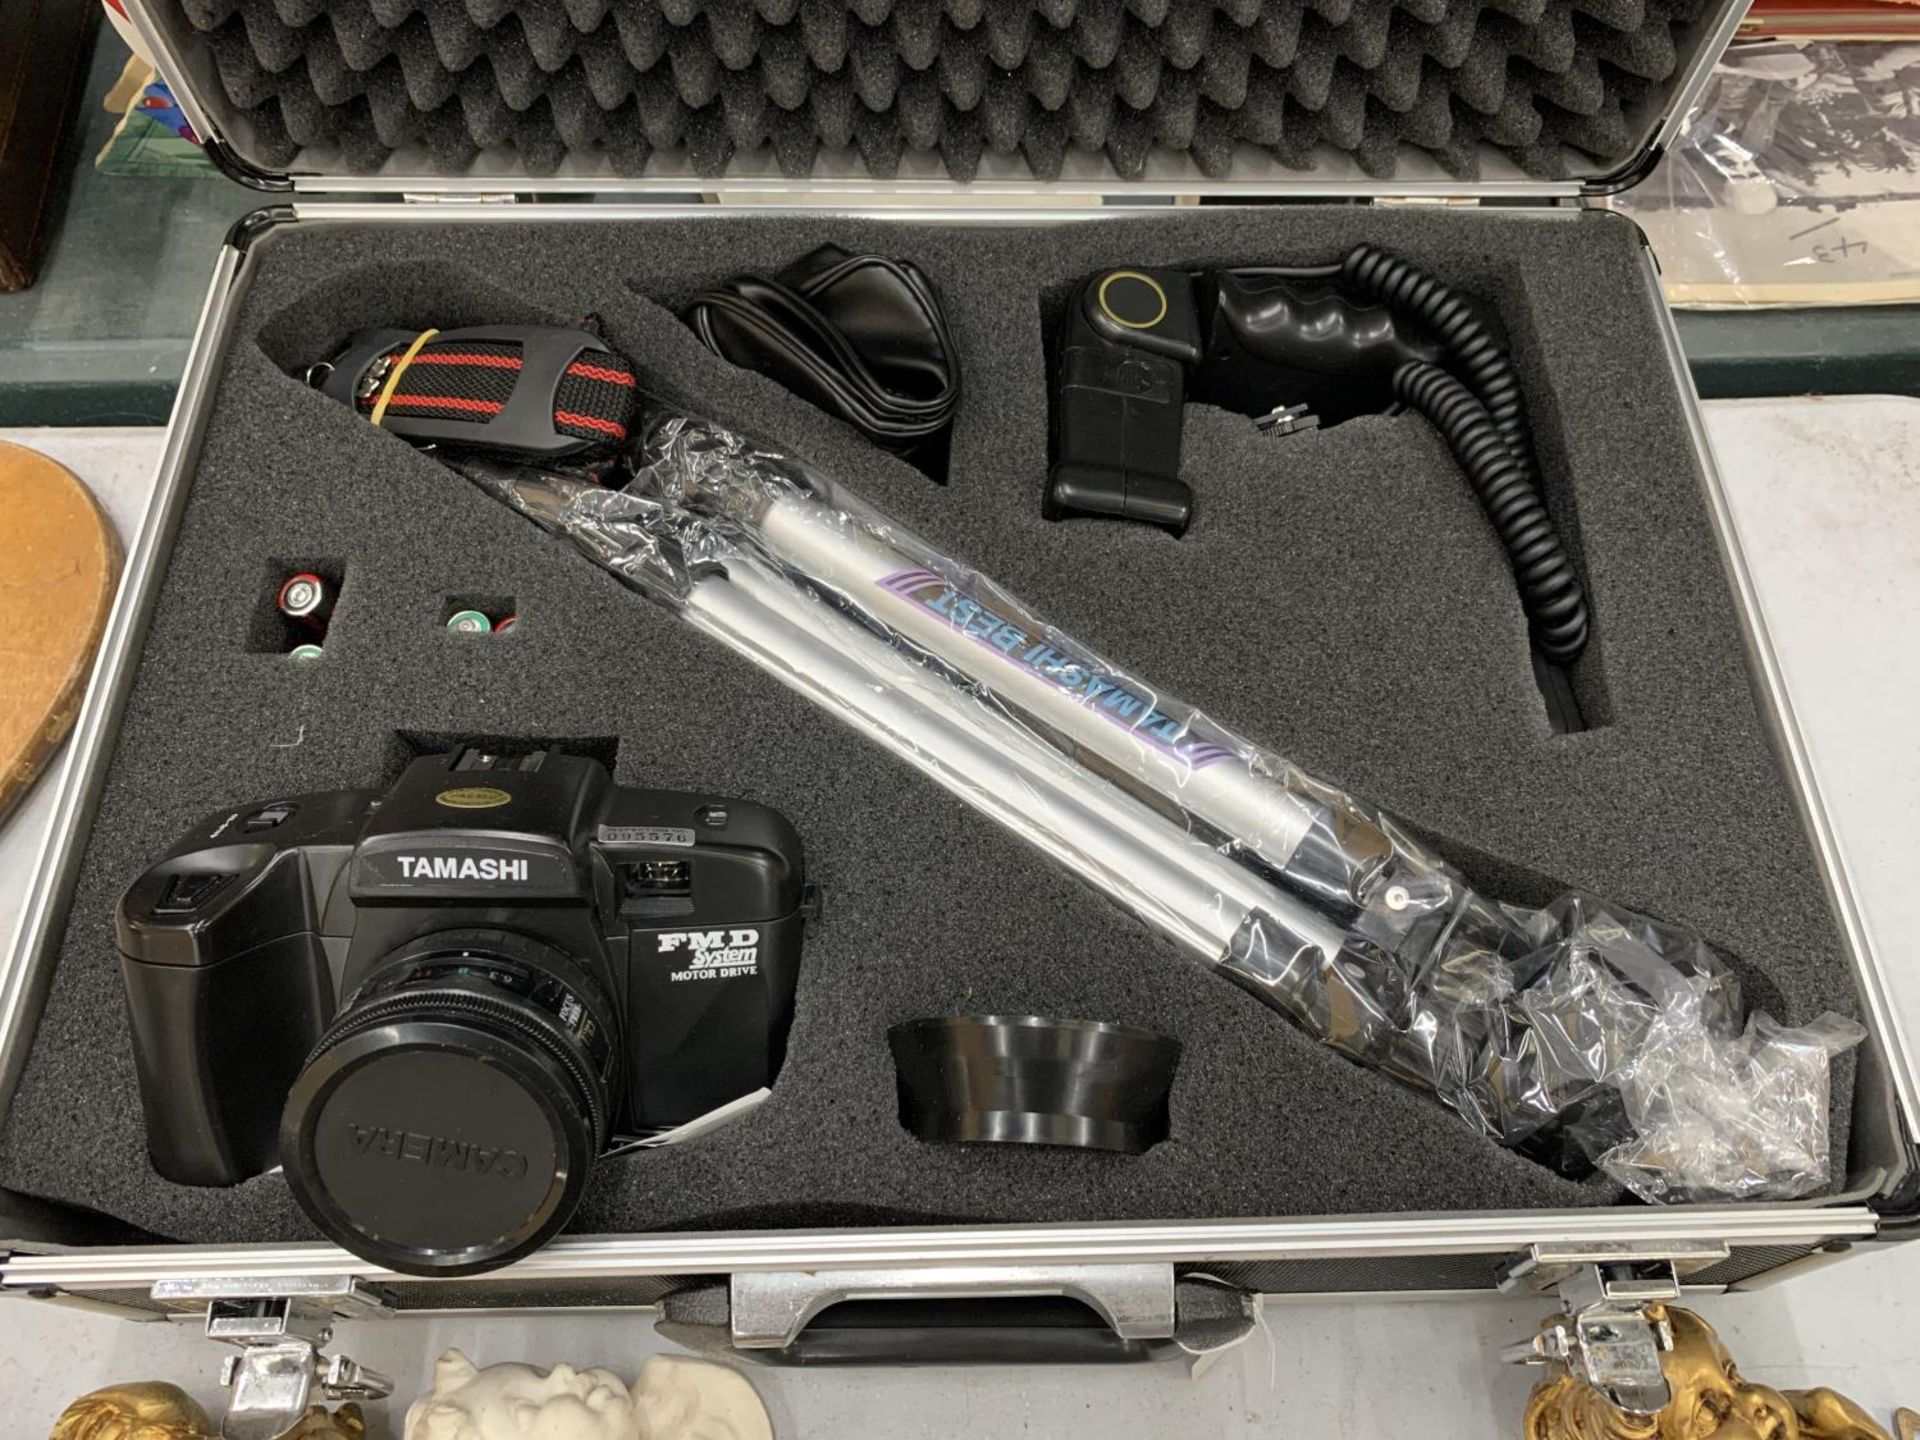 A TAMASHI FMD SYSTEM MOTOR DRIVE CAMERA, BAG, FLASH, AND STRAP IN A METAL CASE